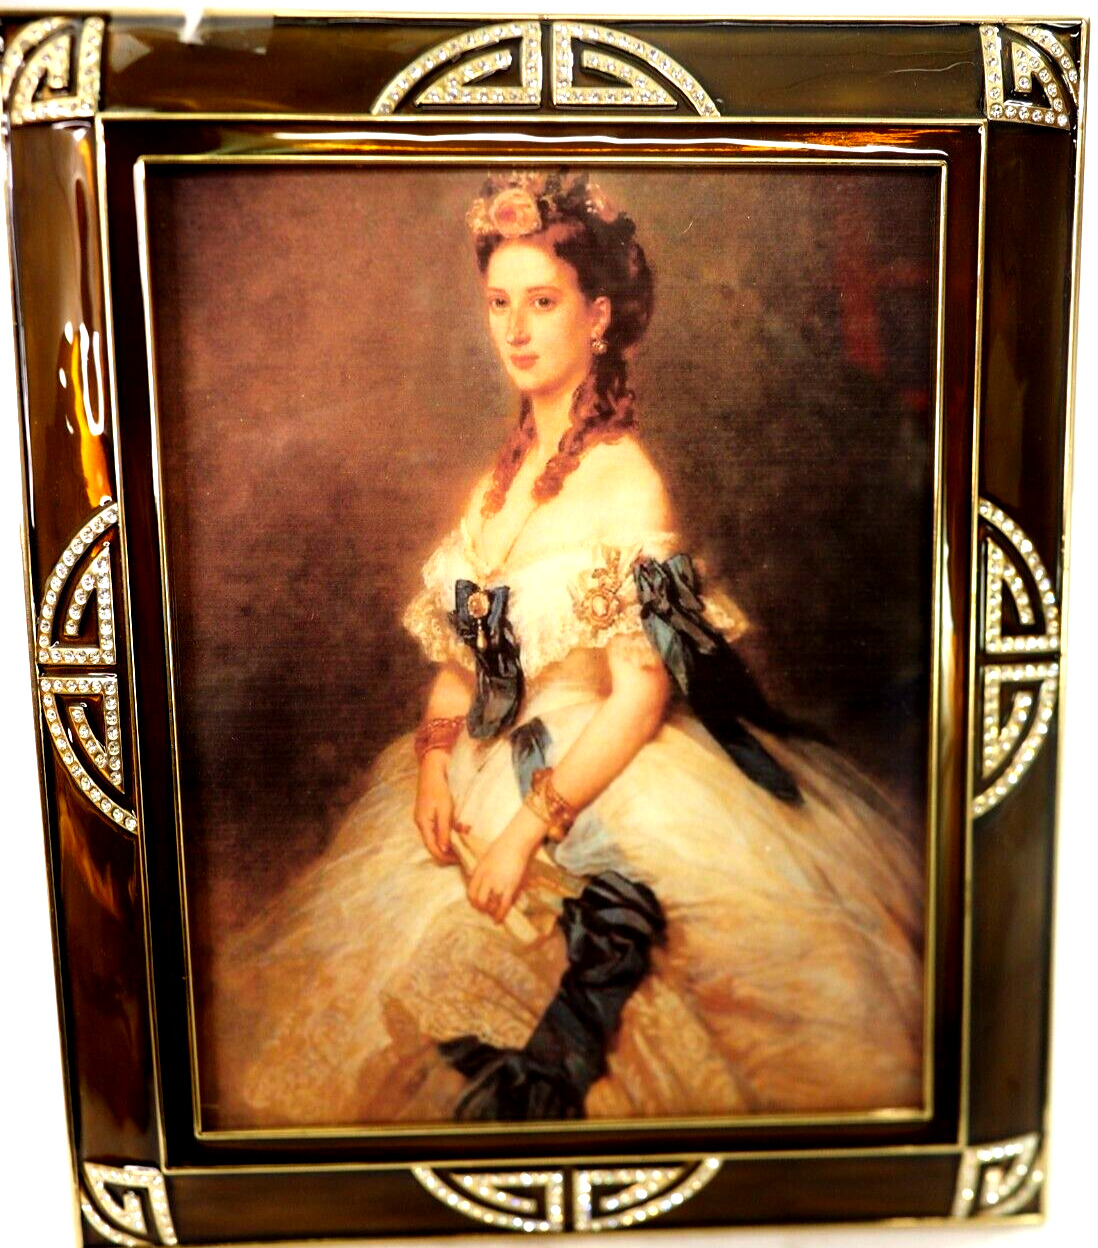 Stunning Brown Enamel Crystal Easel Photo Frame 10x12 Cosmo Collection Mint Box